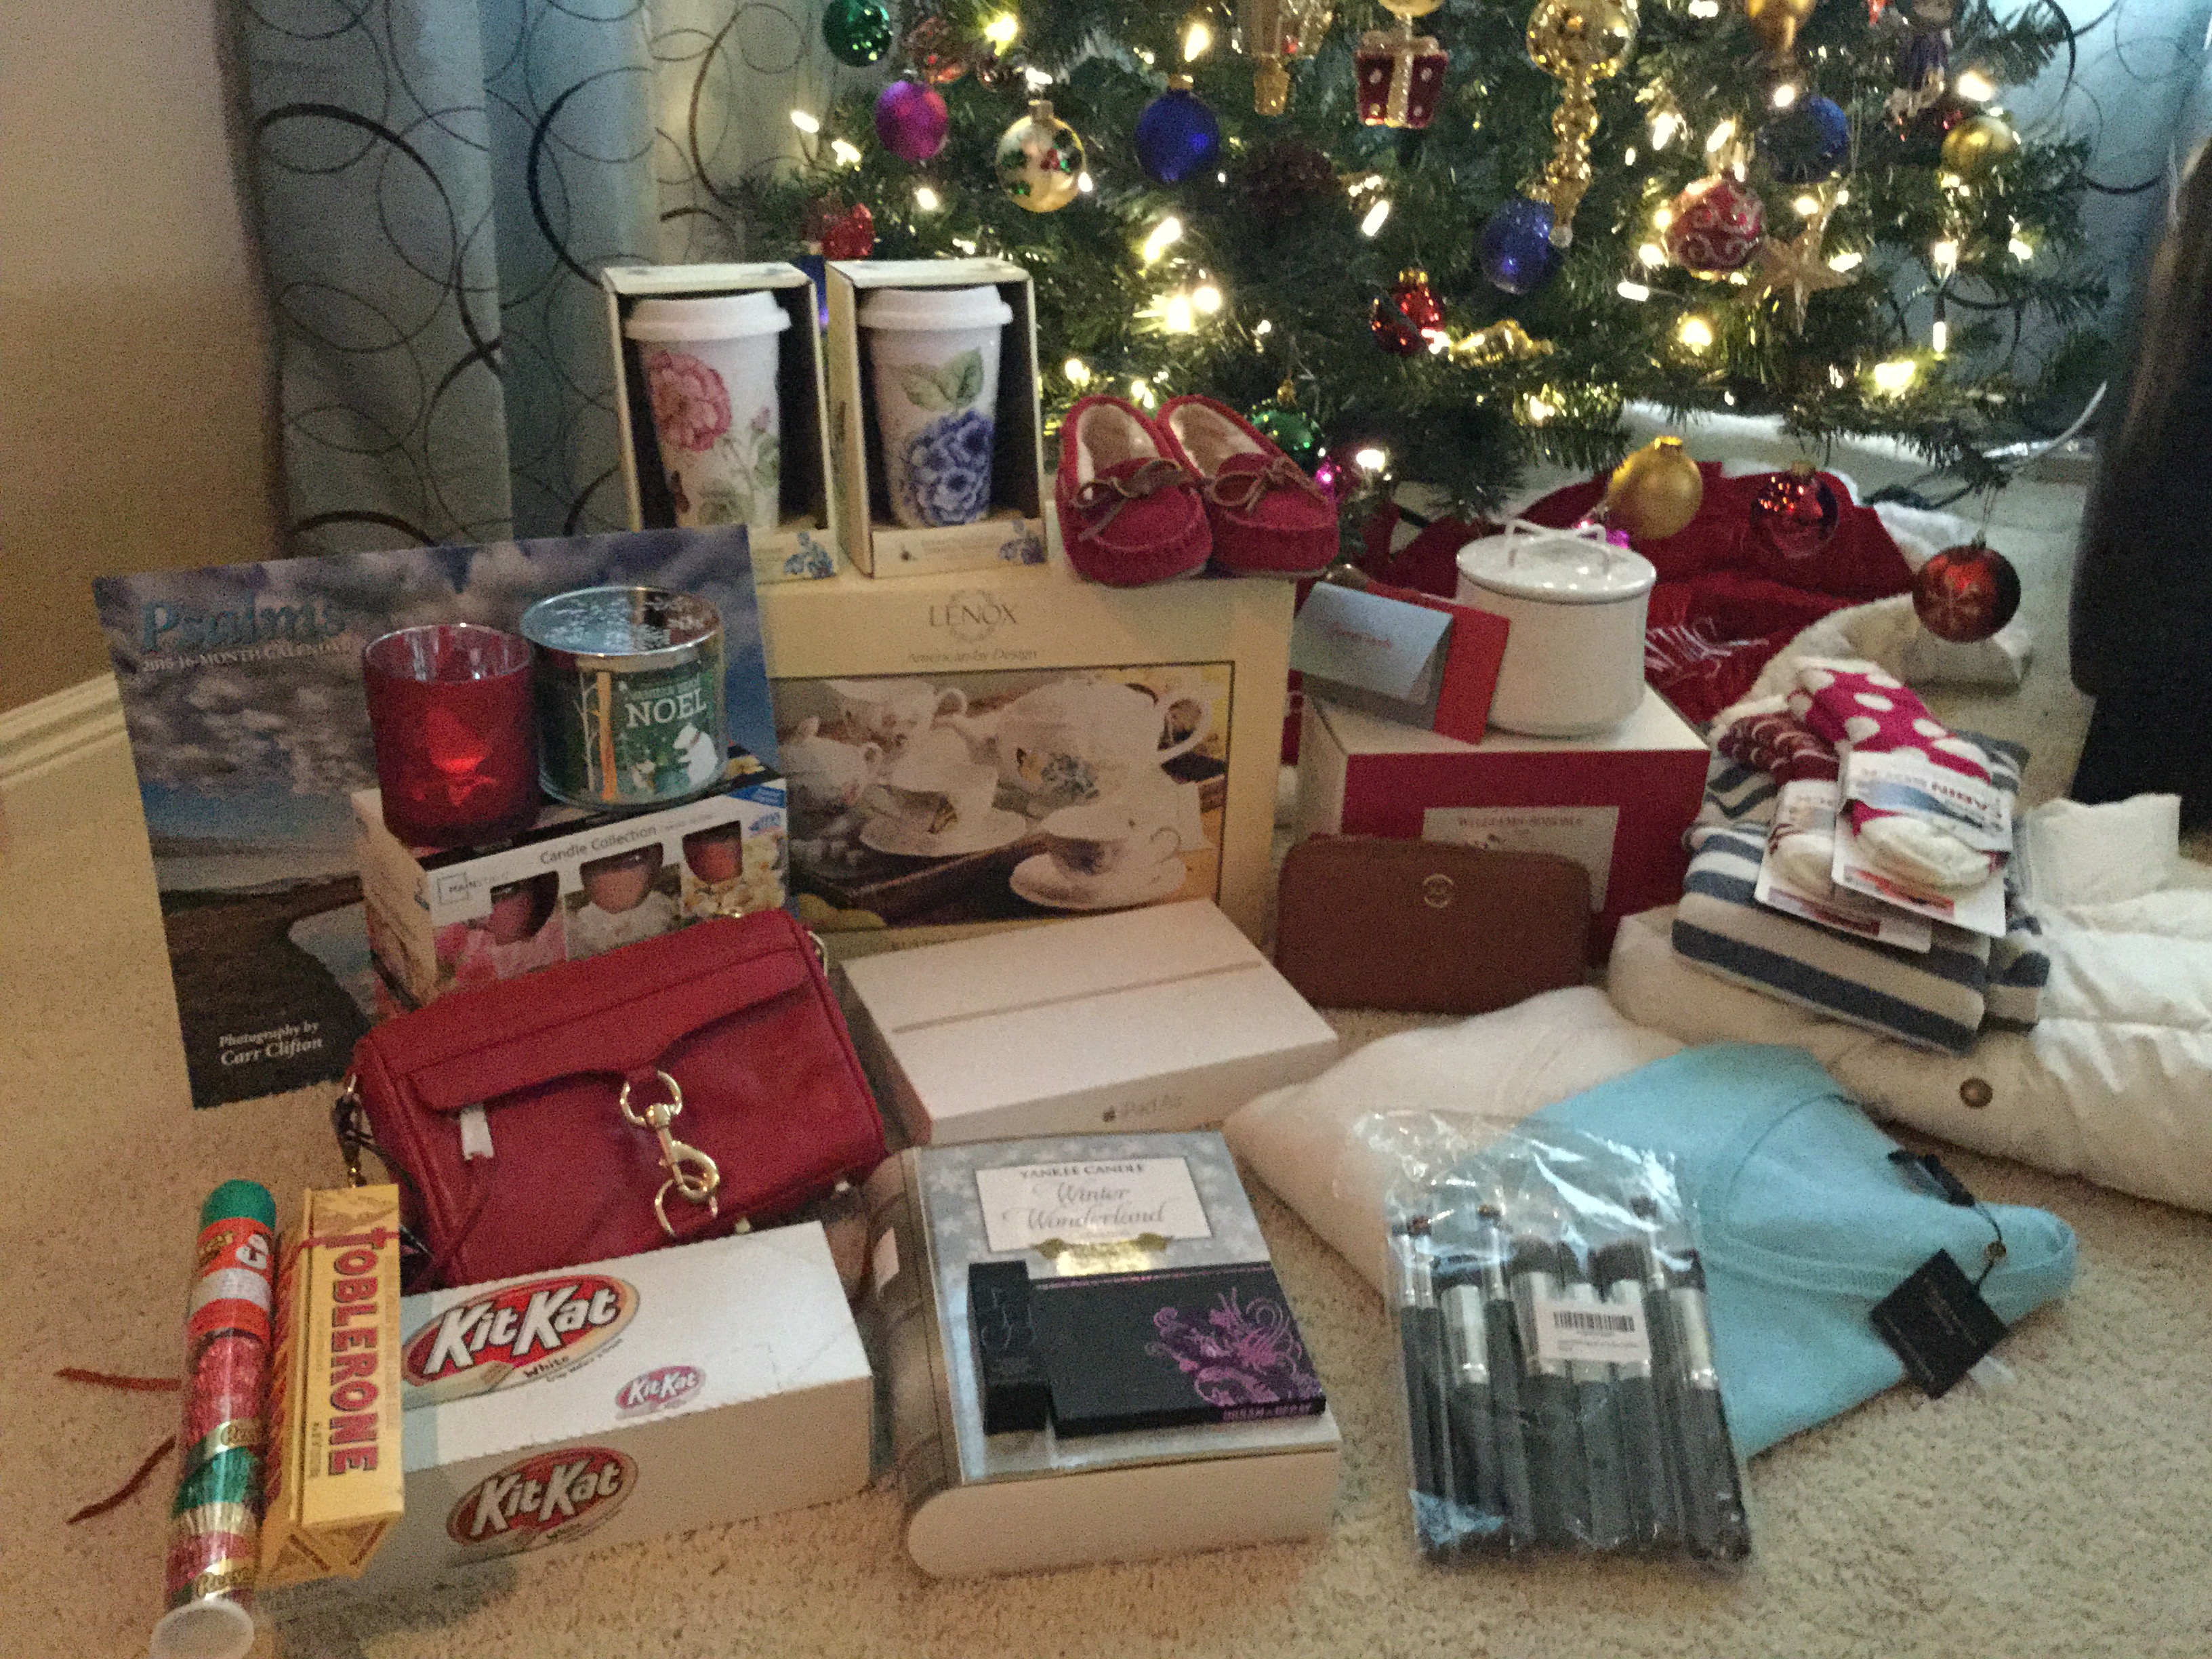 My Christmas gifts 2014,thanks to my family for all the wonderful gifts!